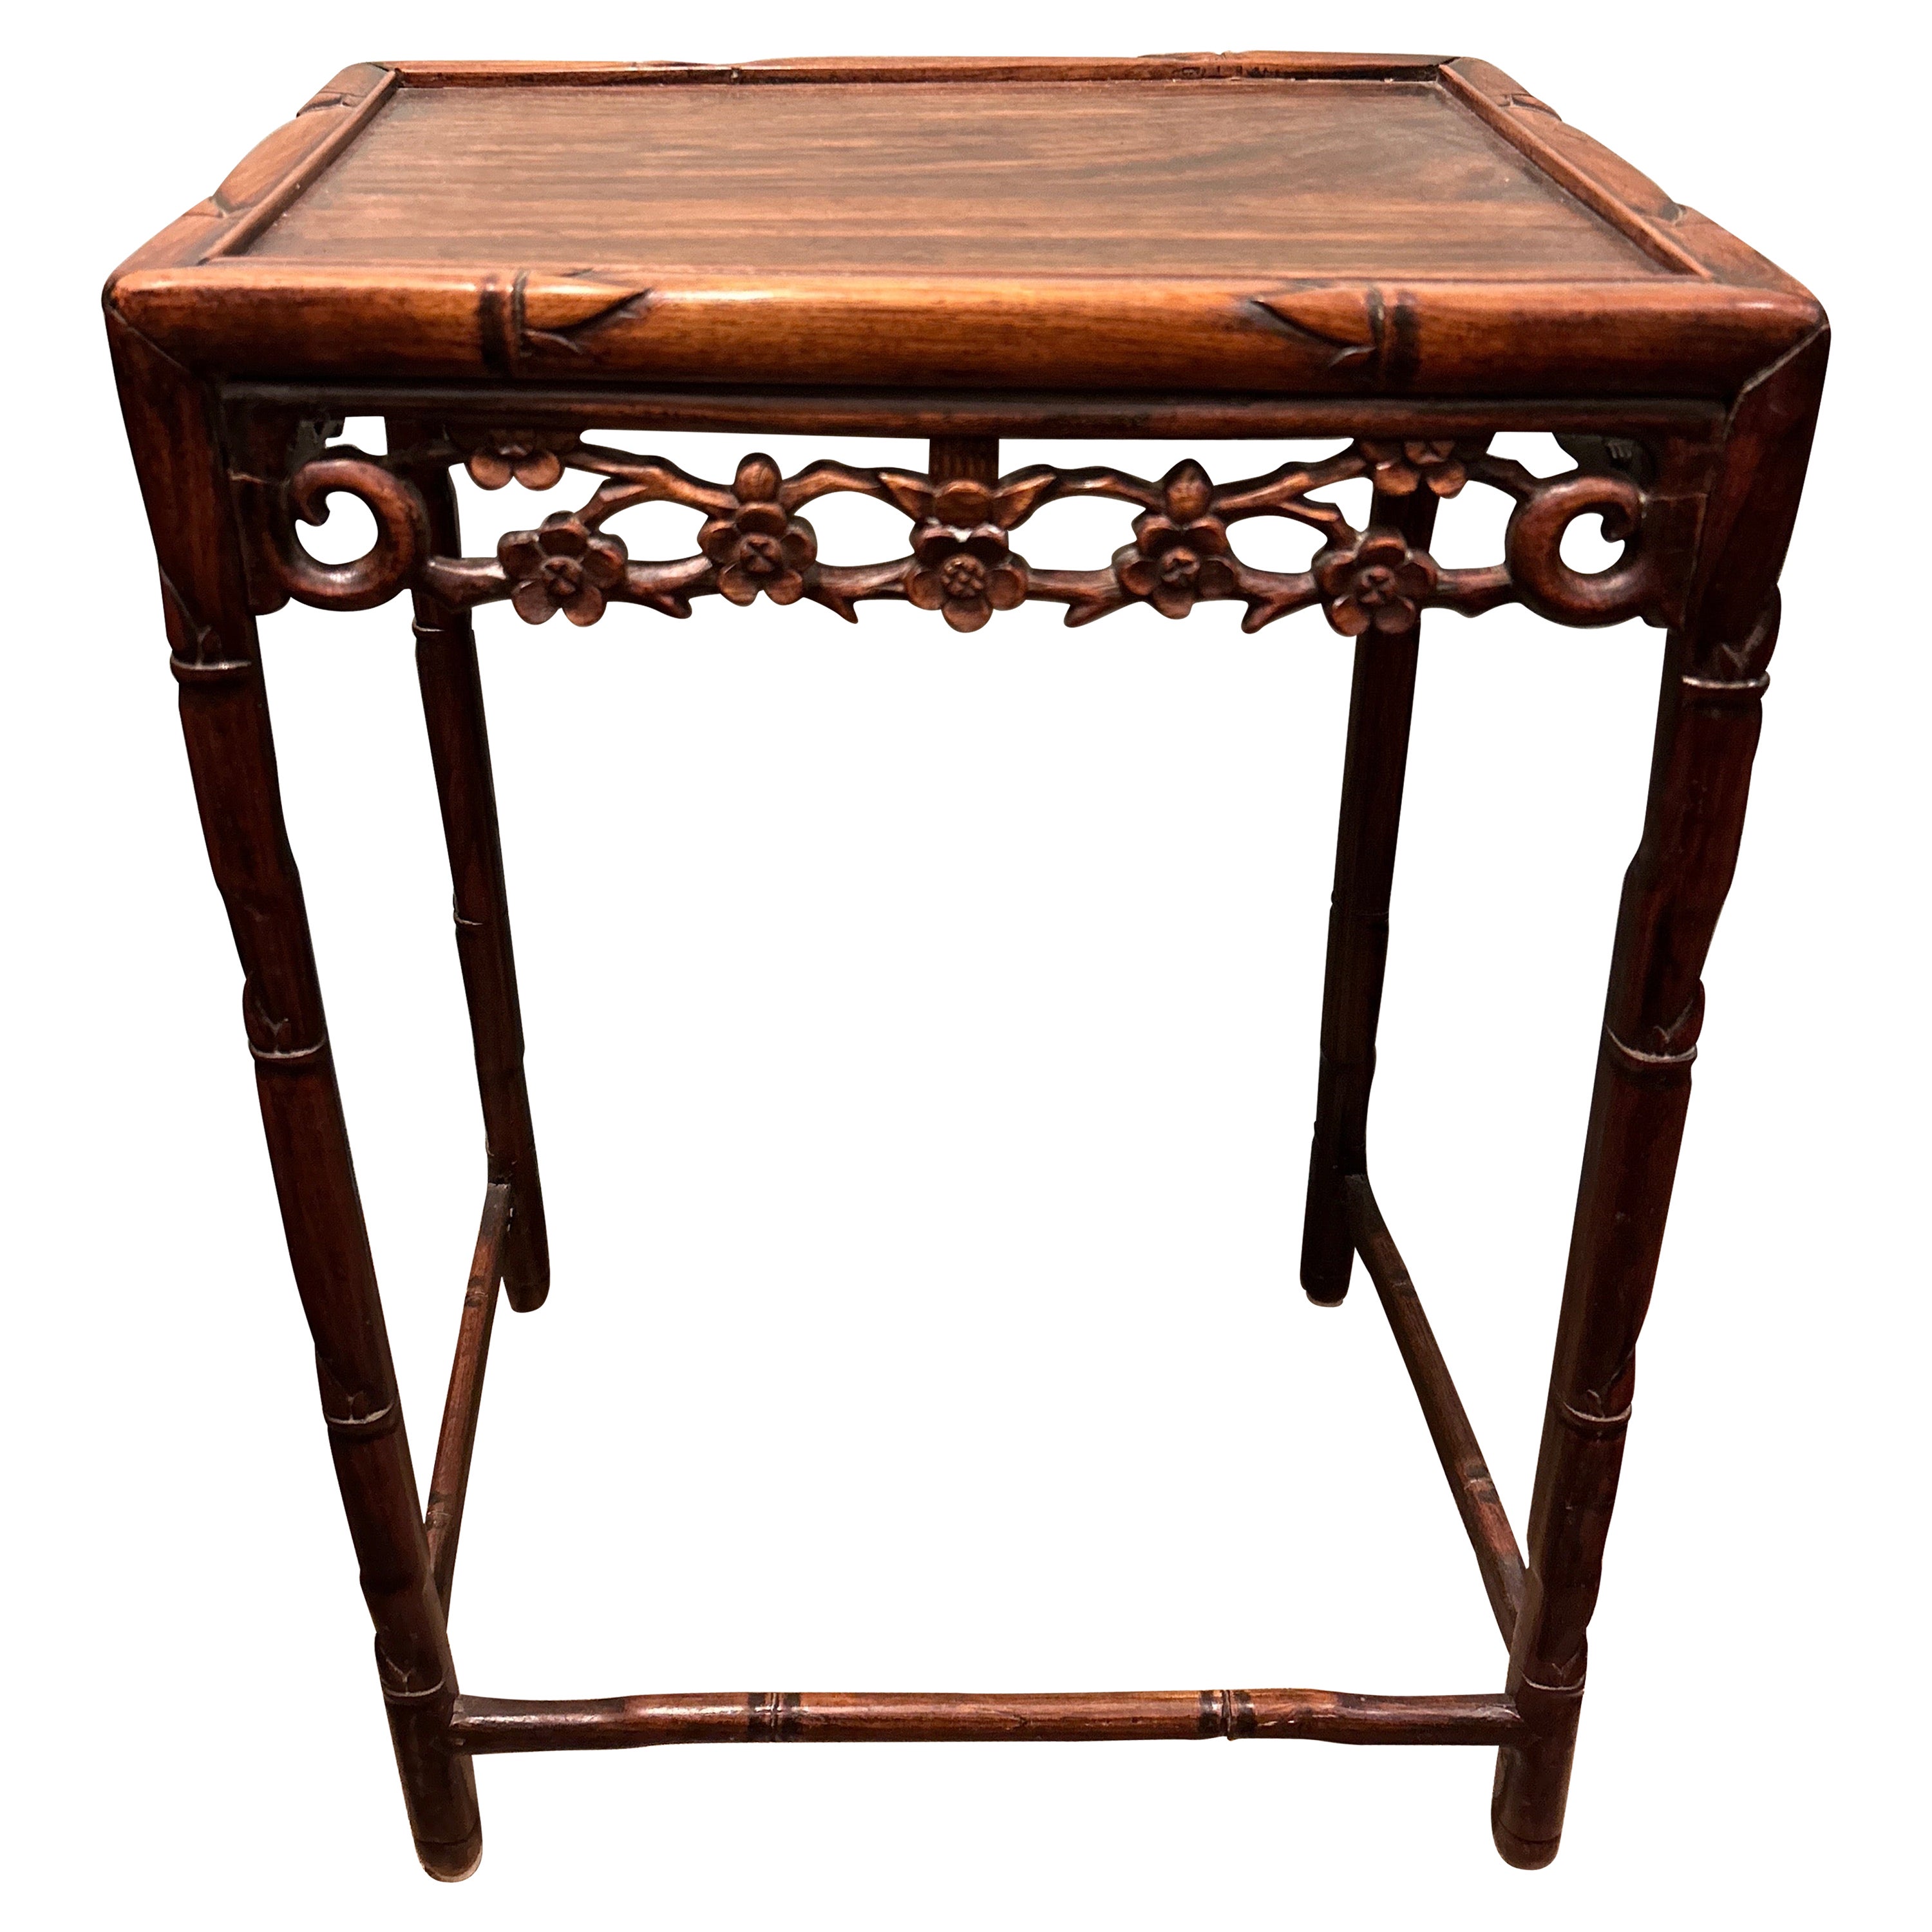 Late Qing Dynasty Rosewood Export Side Table Carved With Floral Bamboo Theme For Sale